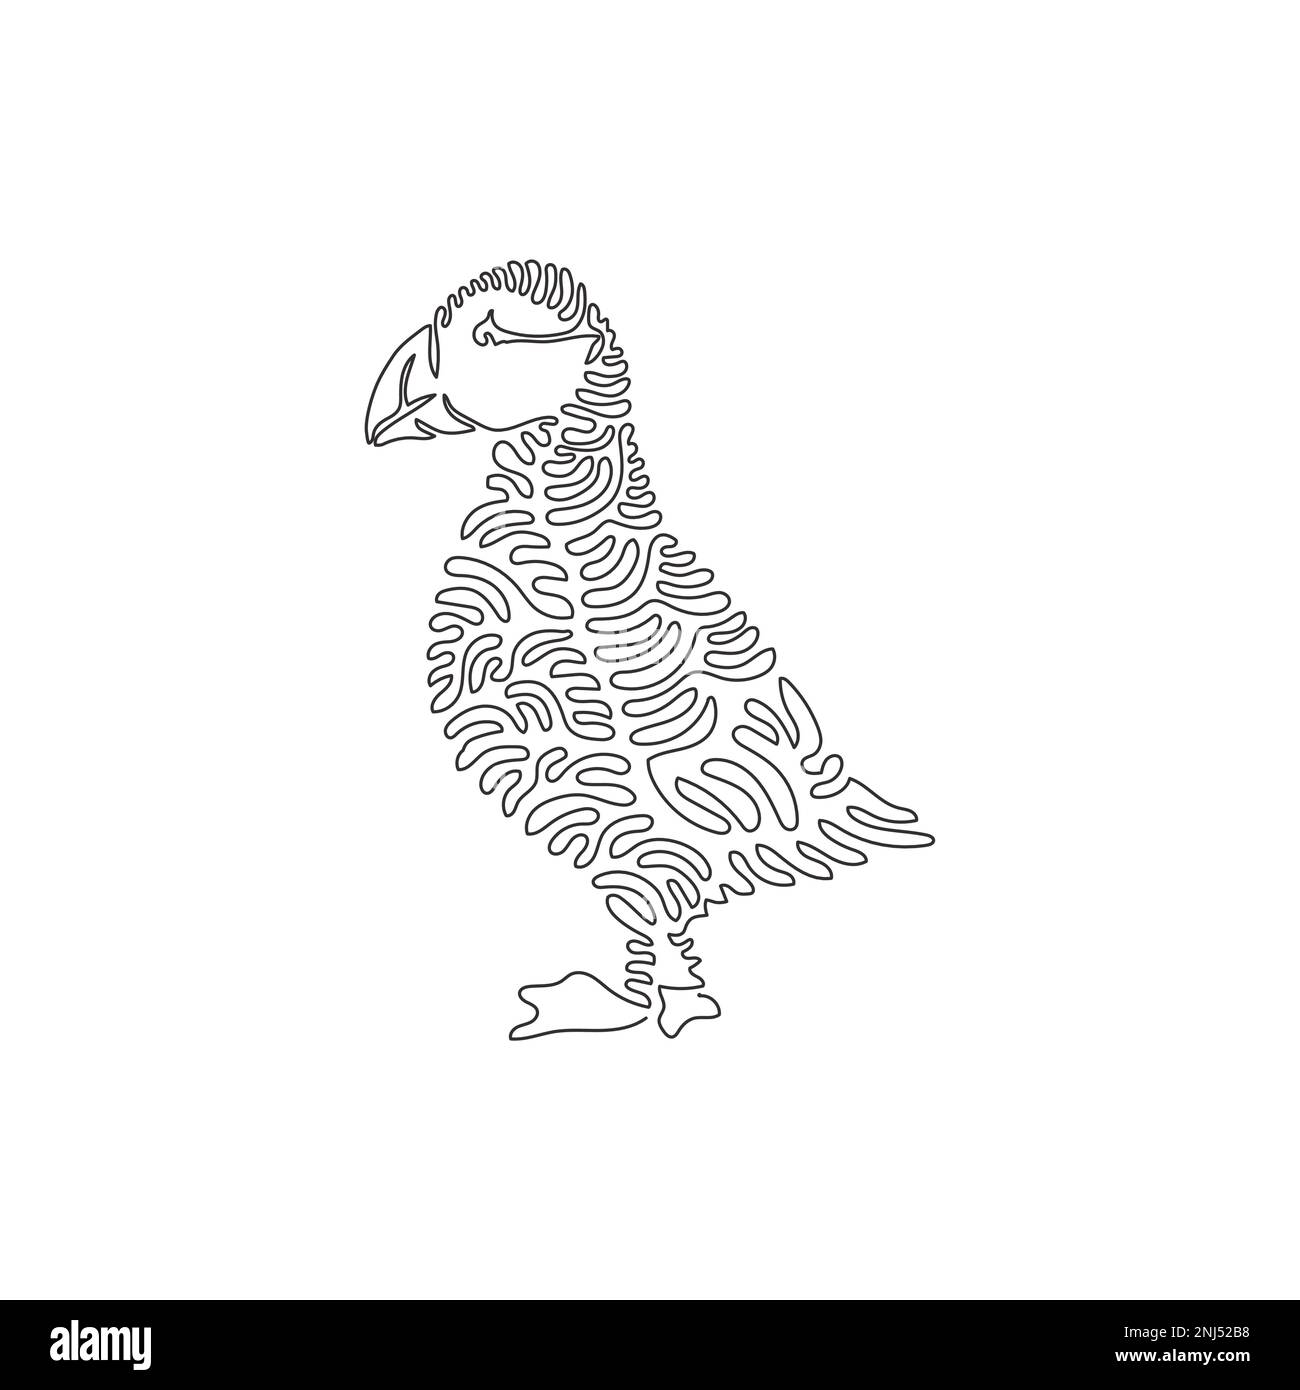 Single continuous line drawing of adorable puffin abstract art. Continuous line drawing design vector illustration style of puffin bird clowns the sea Stock Vector